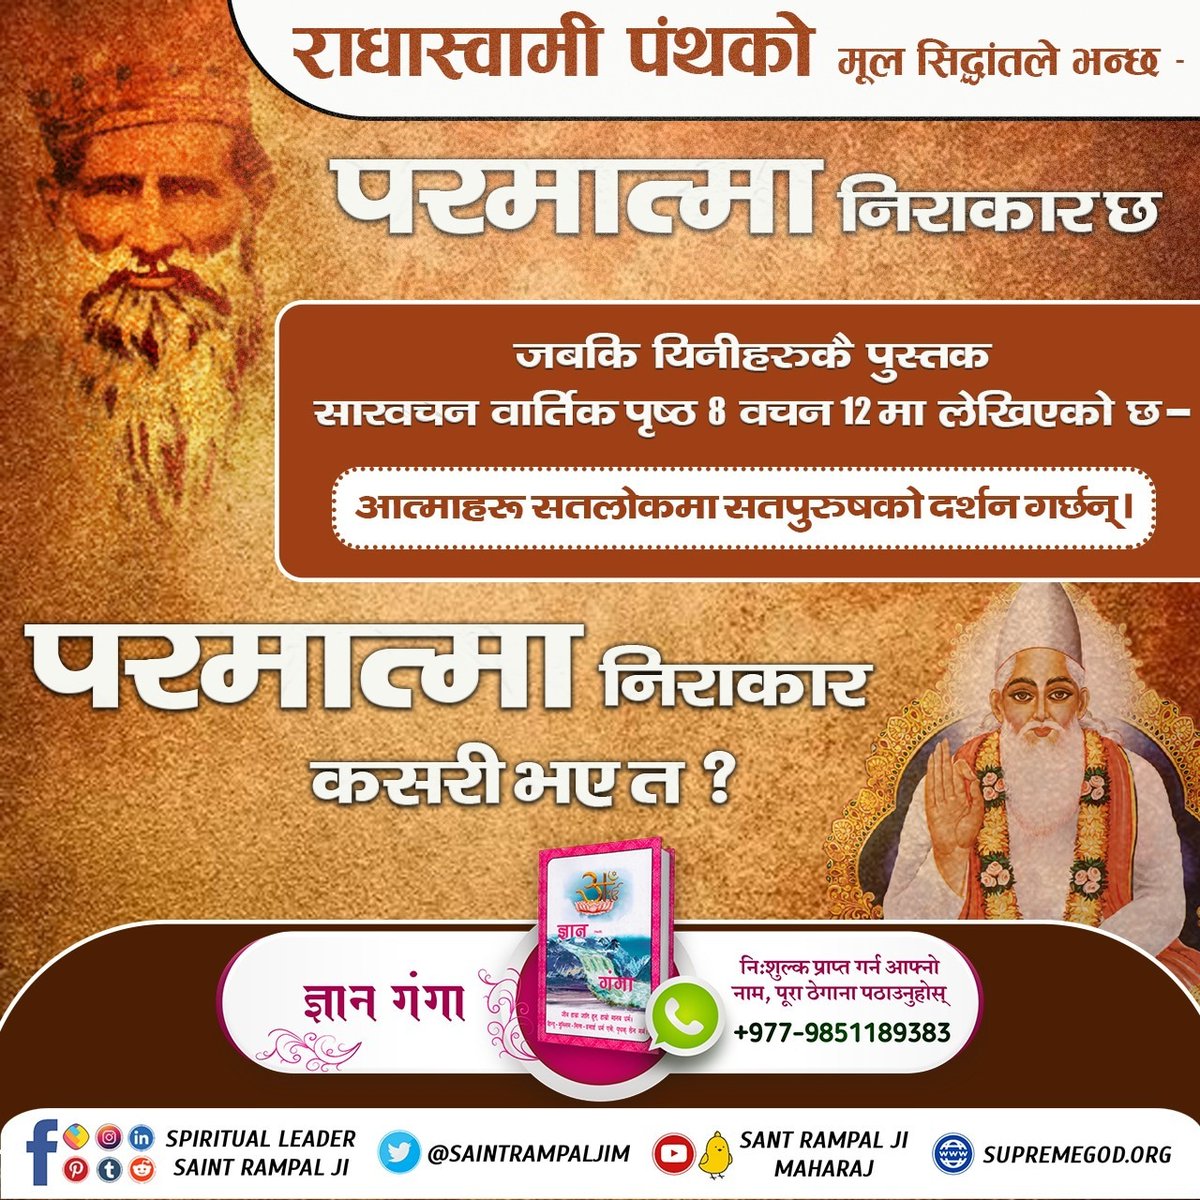 #राधास्वामी_पन्थको_सत्यता
Proponents of the Radha Swami cult say that the Supreme Personality of Godhead is formless and His light can be seen.  But it is clearly written in the Vedas that God is in form, (male form).
Read the previous book 'Gyan Ganga''
#GodMorningThursday